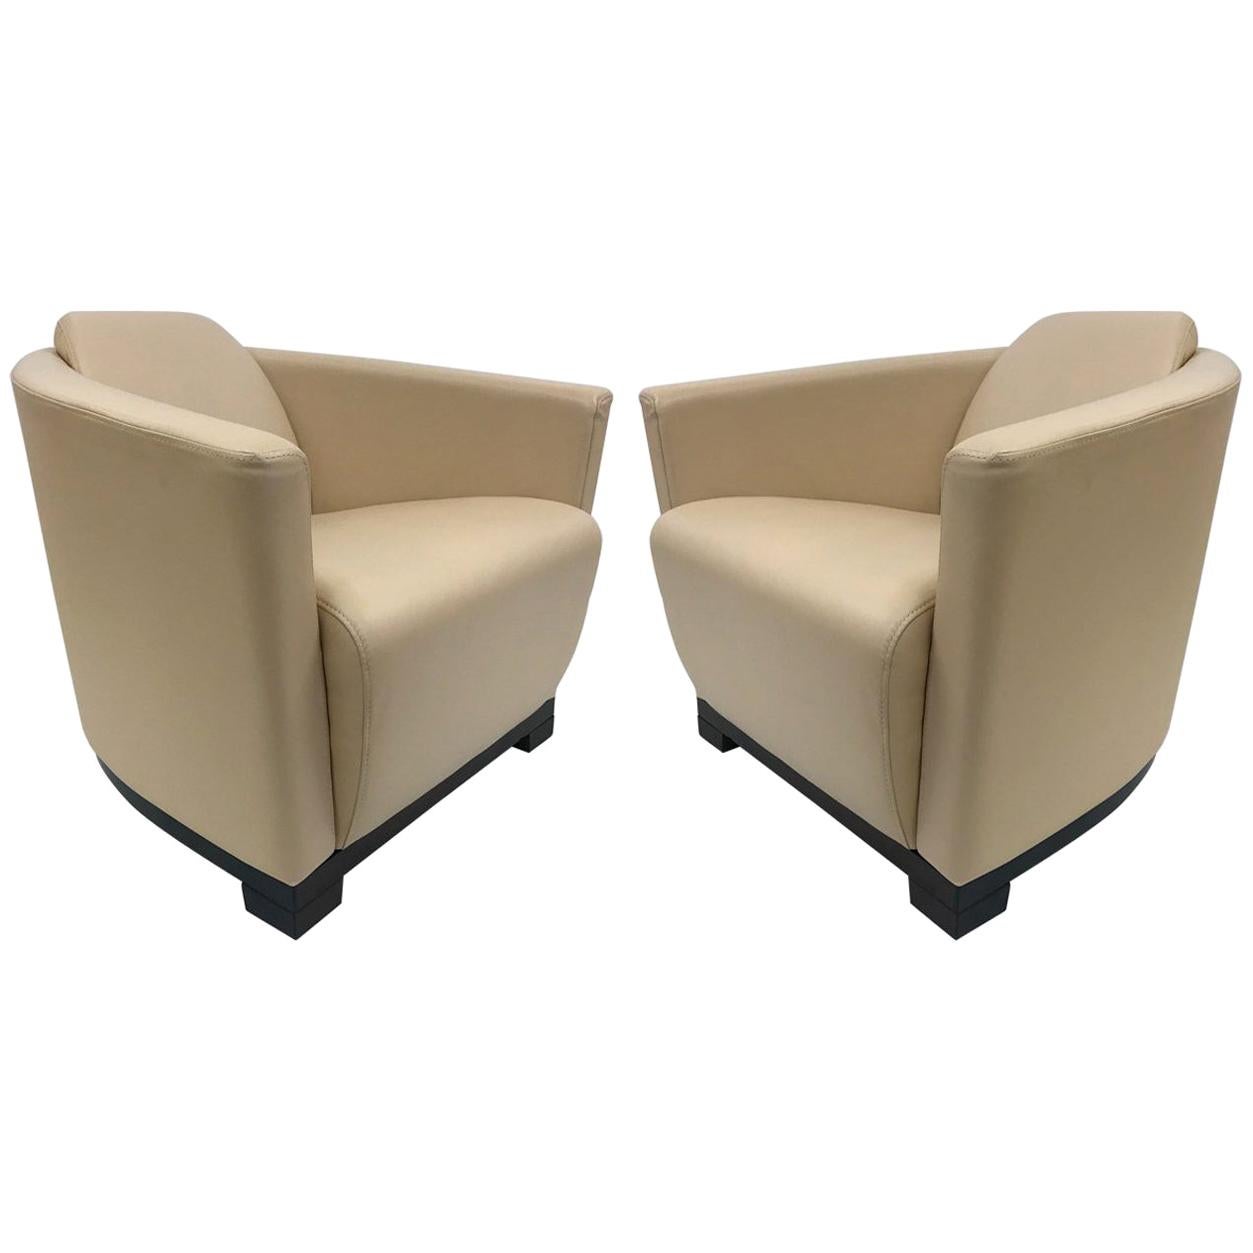 Pair of Modern Italian Leather Lounge Chairs